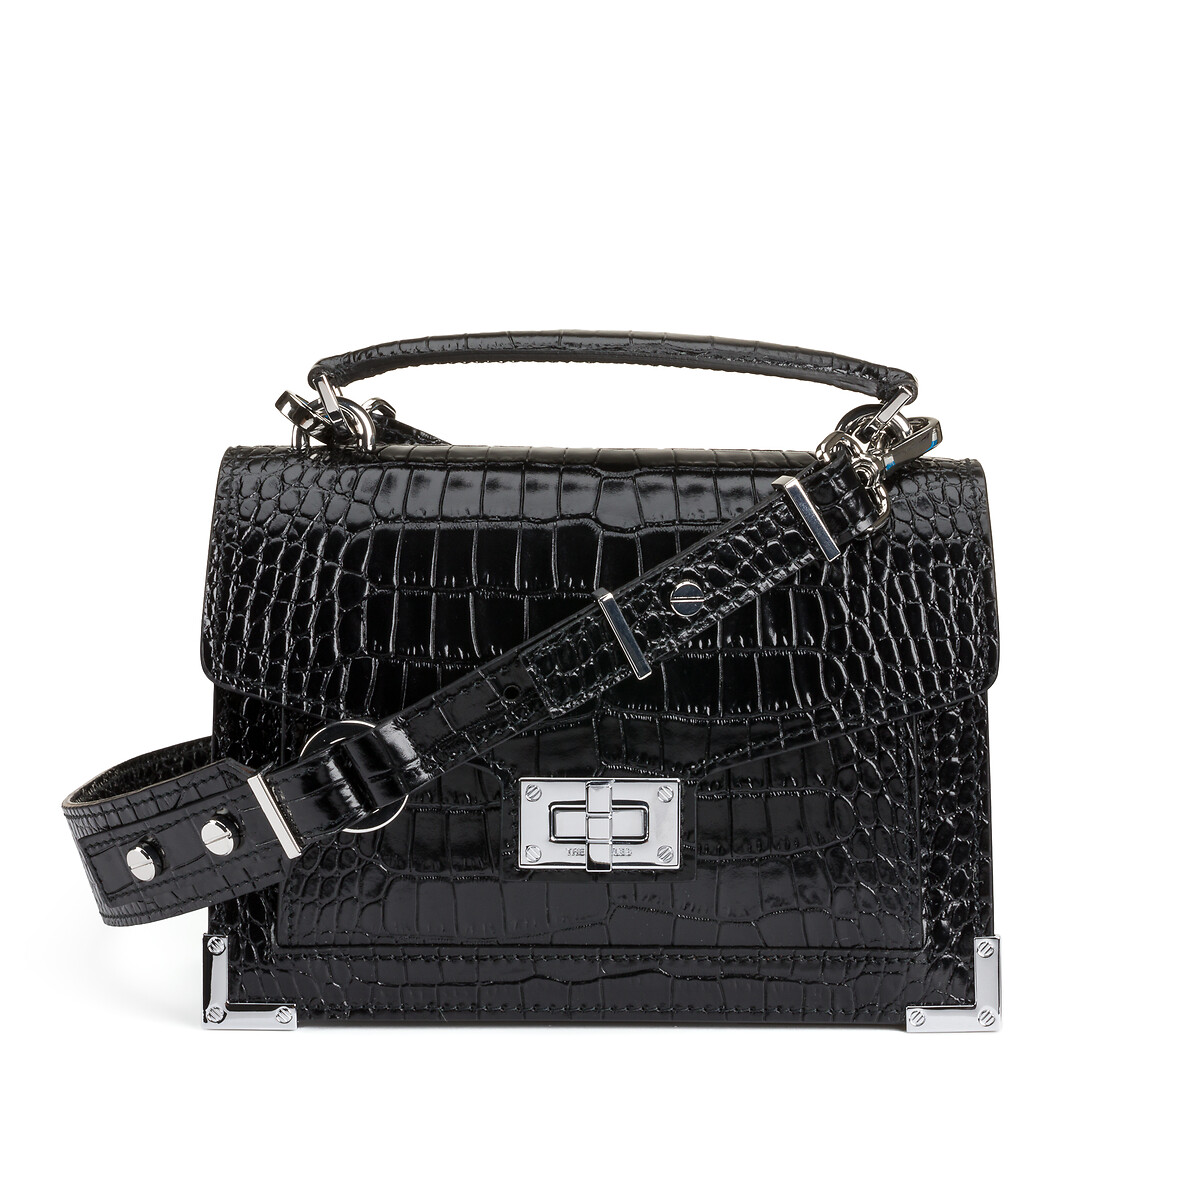 Small Emily bag in black leather | The Kooples